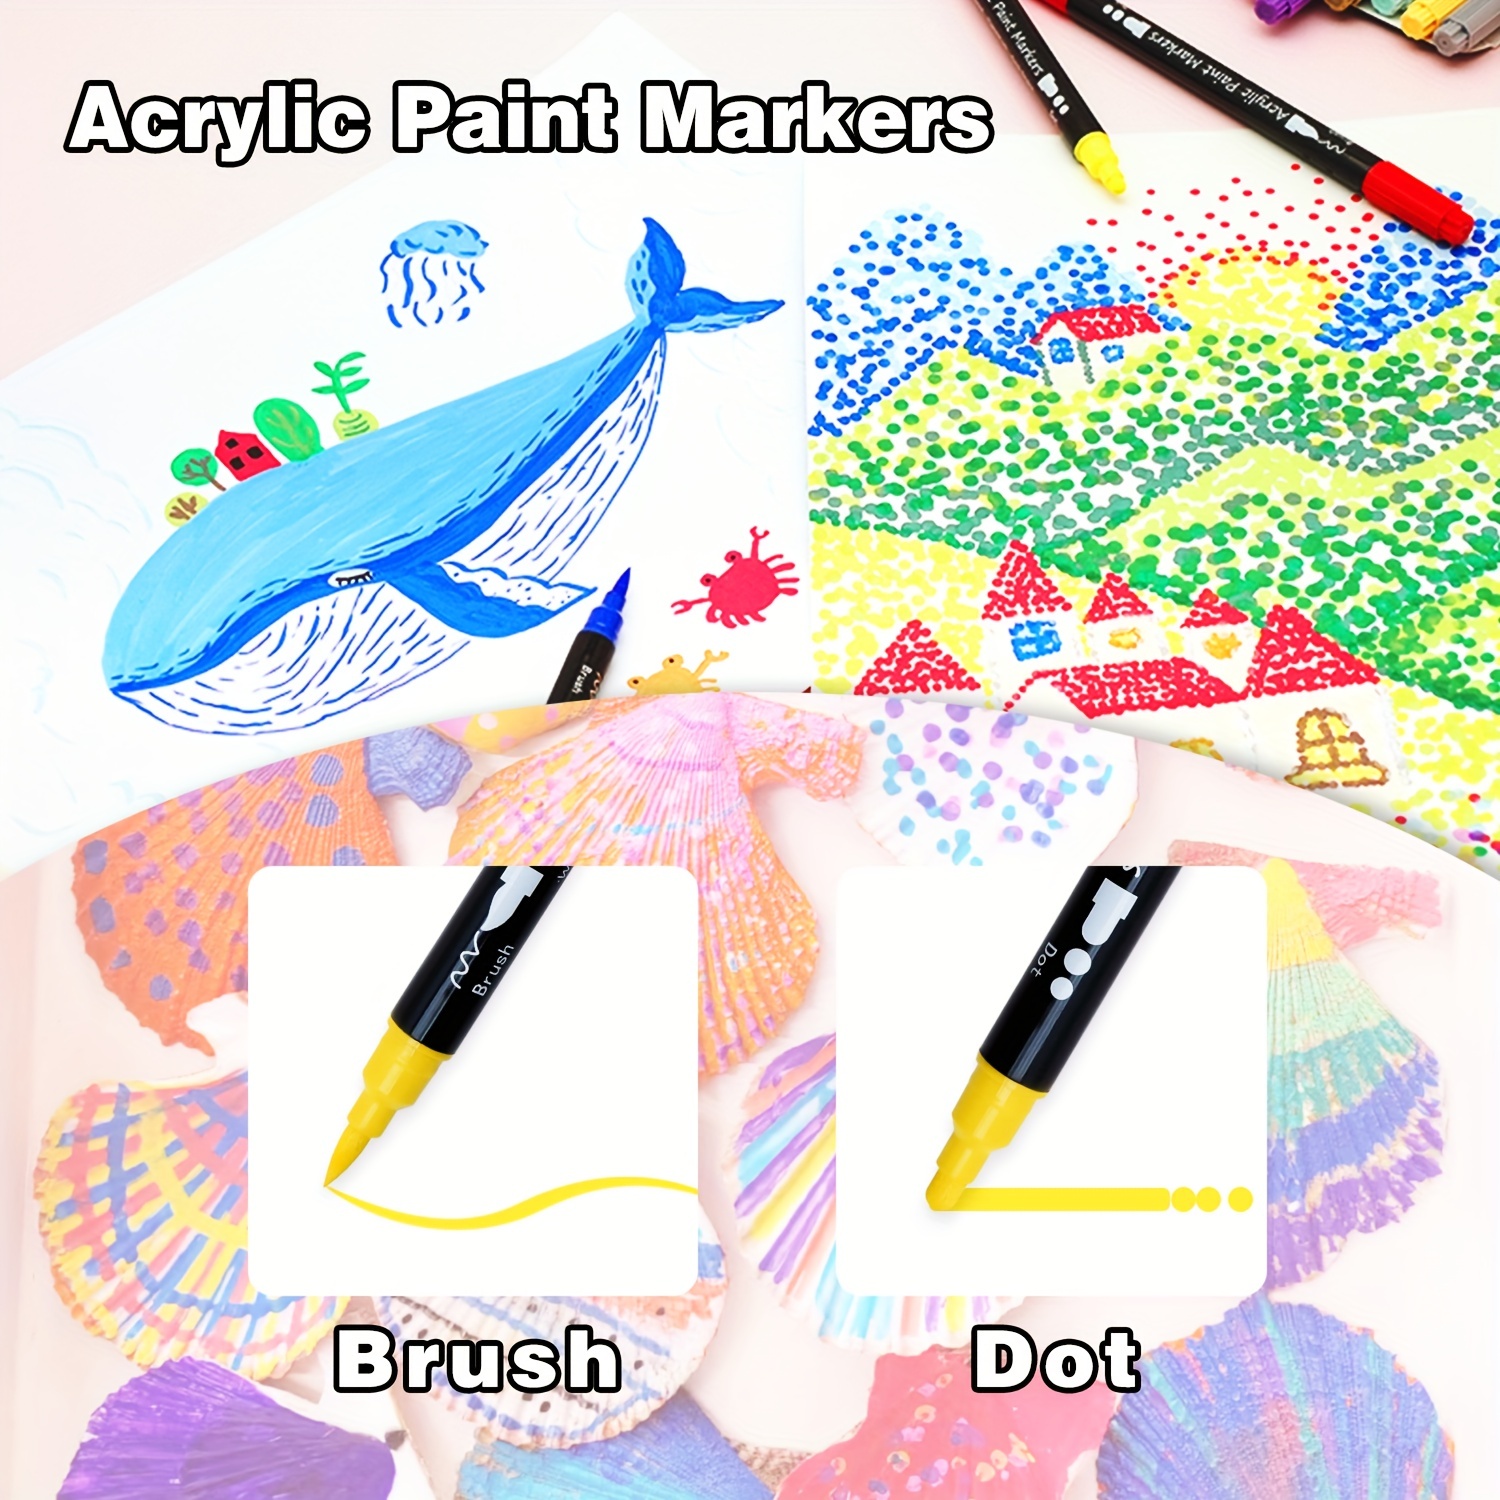  Acrylic Paint Pens for Rock Painting Set of 30 Paint Markers  Extra Fine Tip for Wood, Canvas, Plastic, Ceramic, Glass, Drawing & craft  Supplies Crafts for Adults & Kids for Scrapbooking